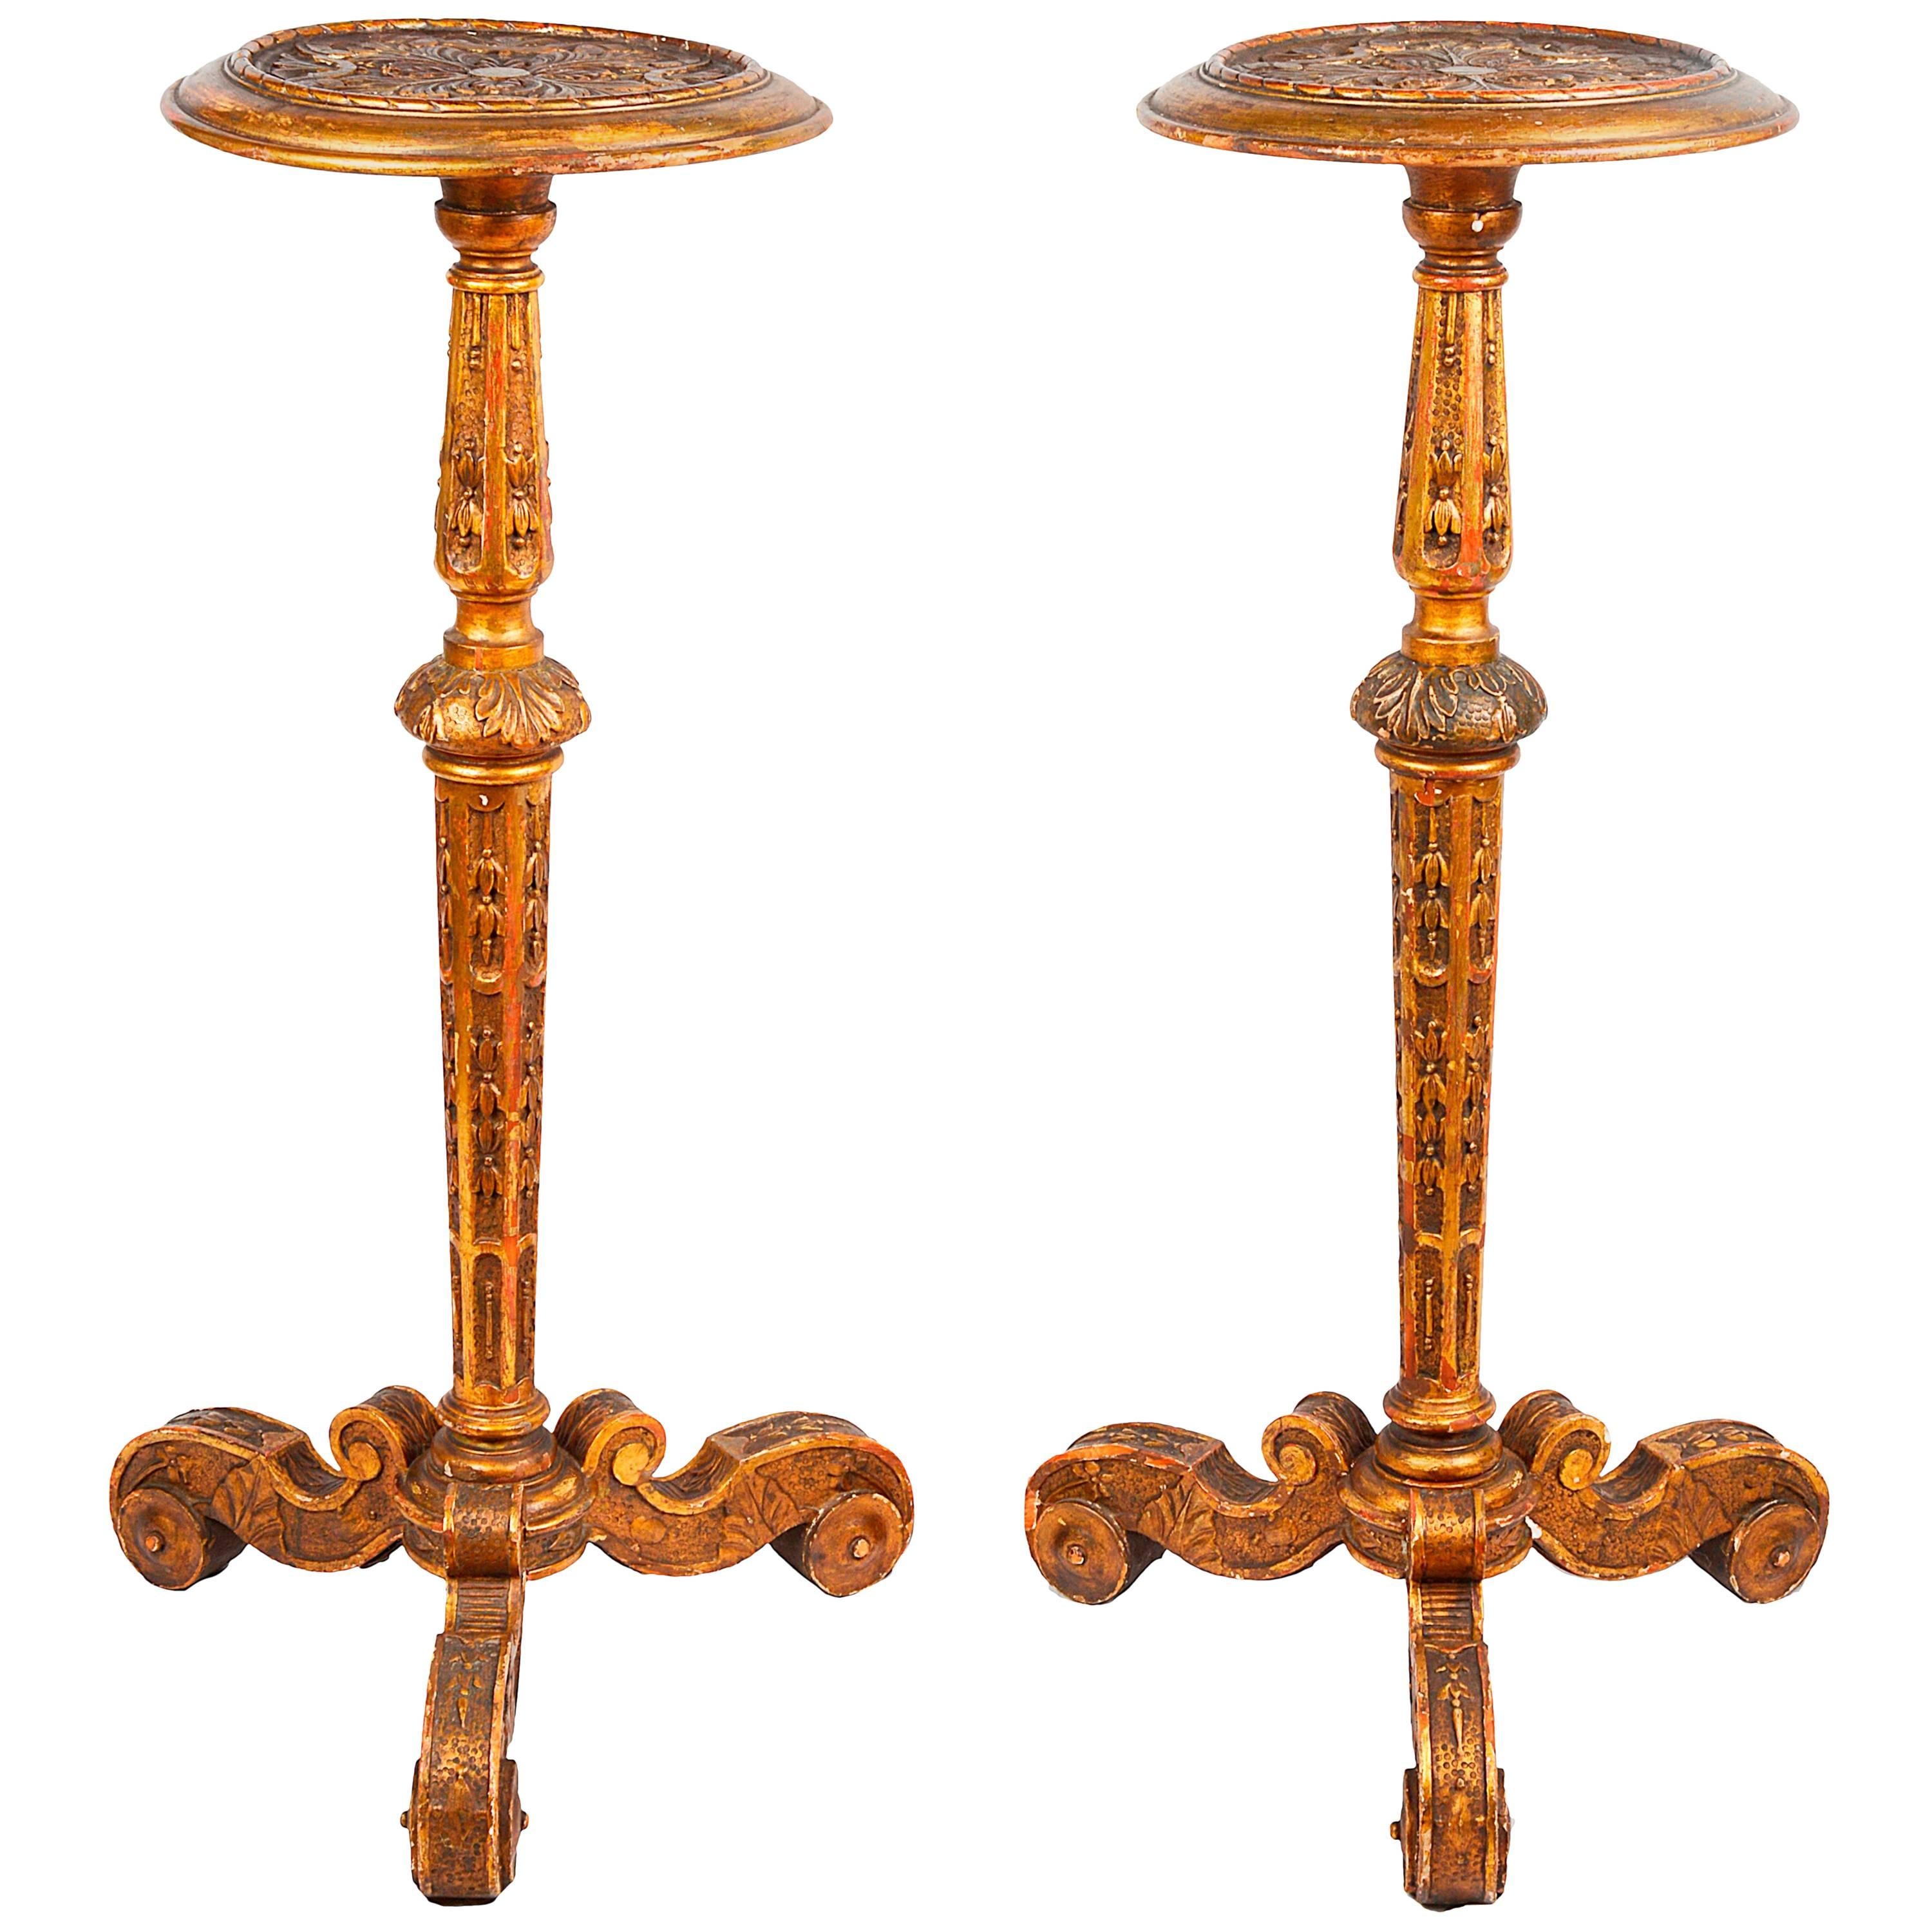 Pair of Carved Gilded Torchas, 19th Century